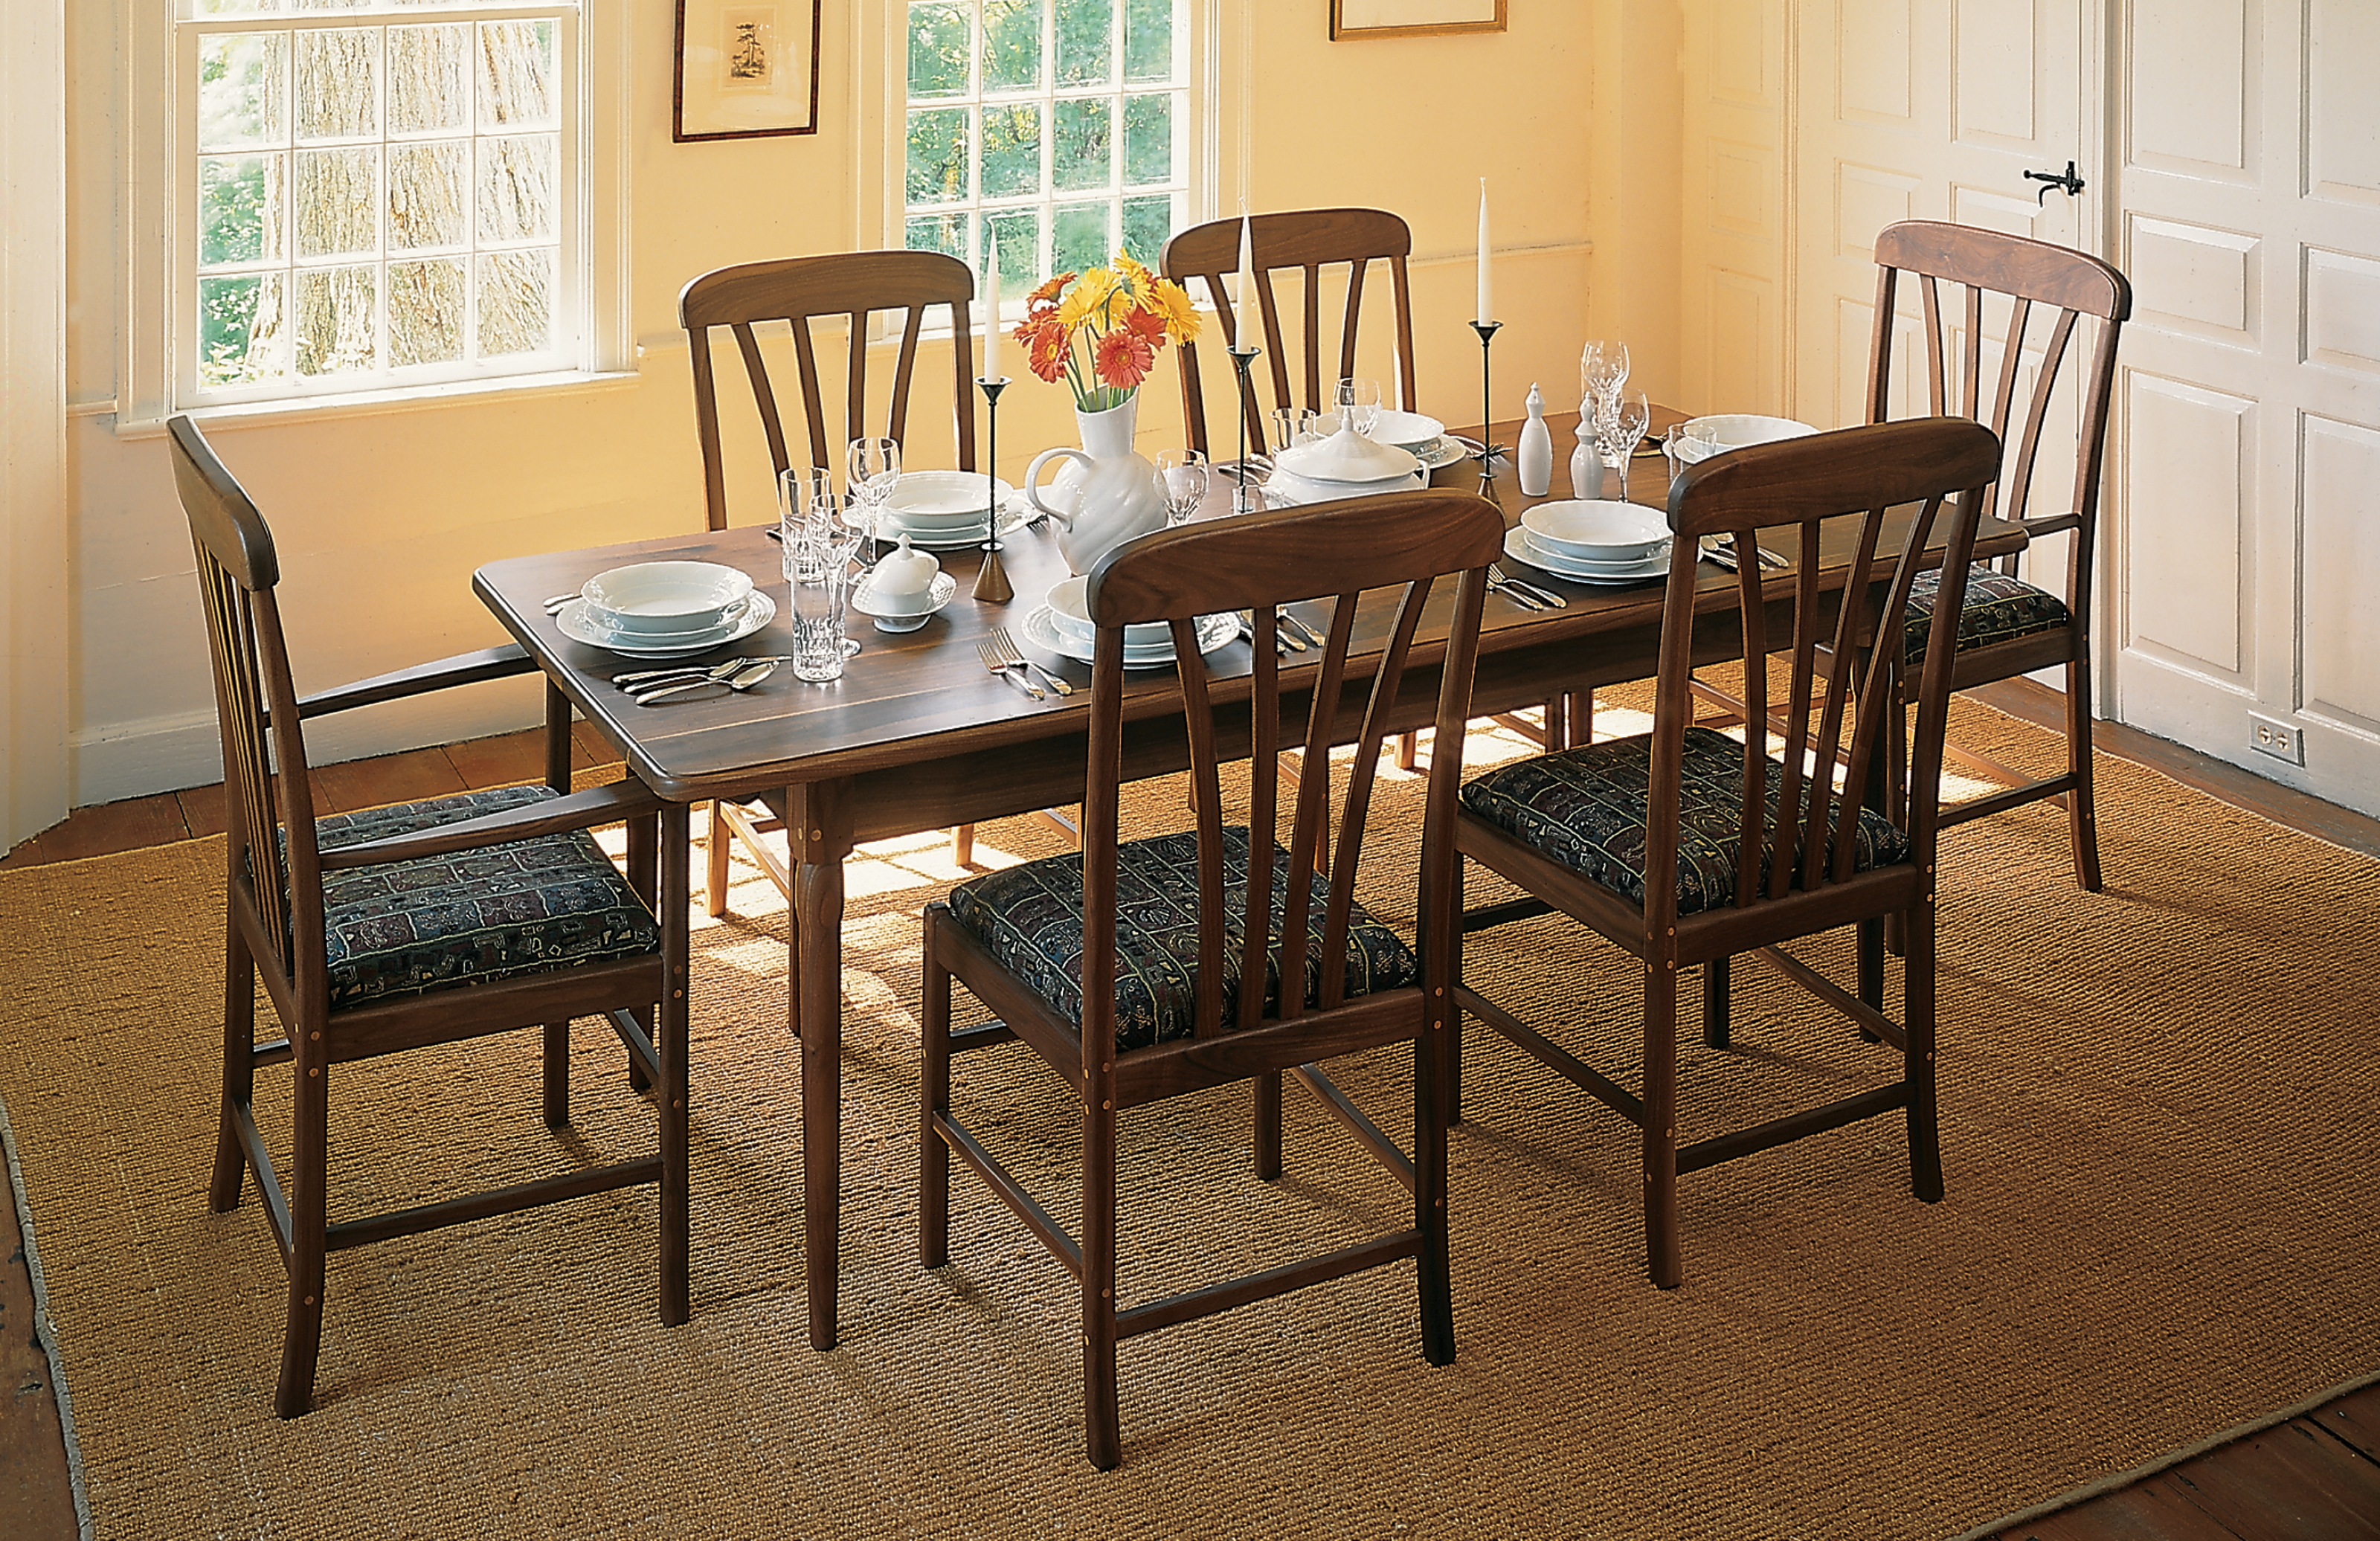 walnut dining table and chairs. Set for dinner.